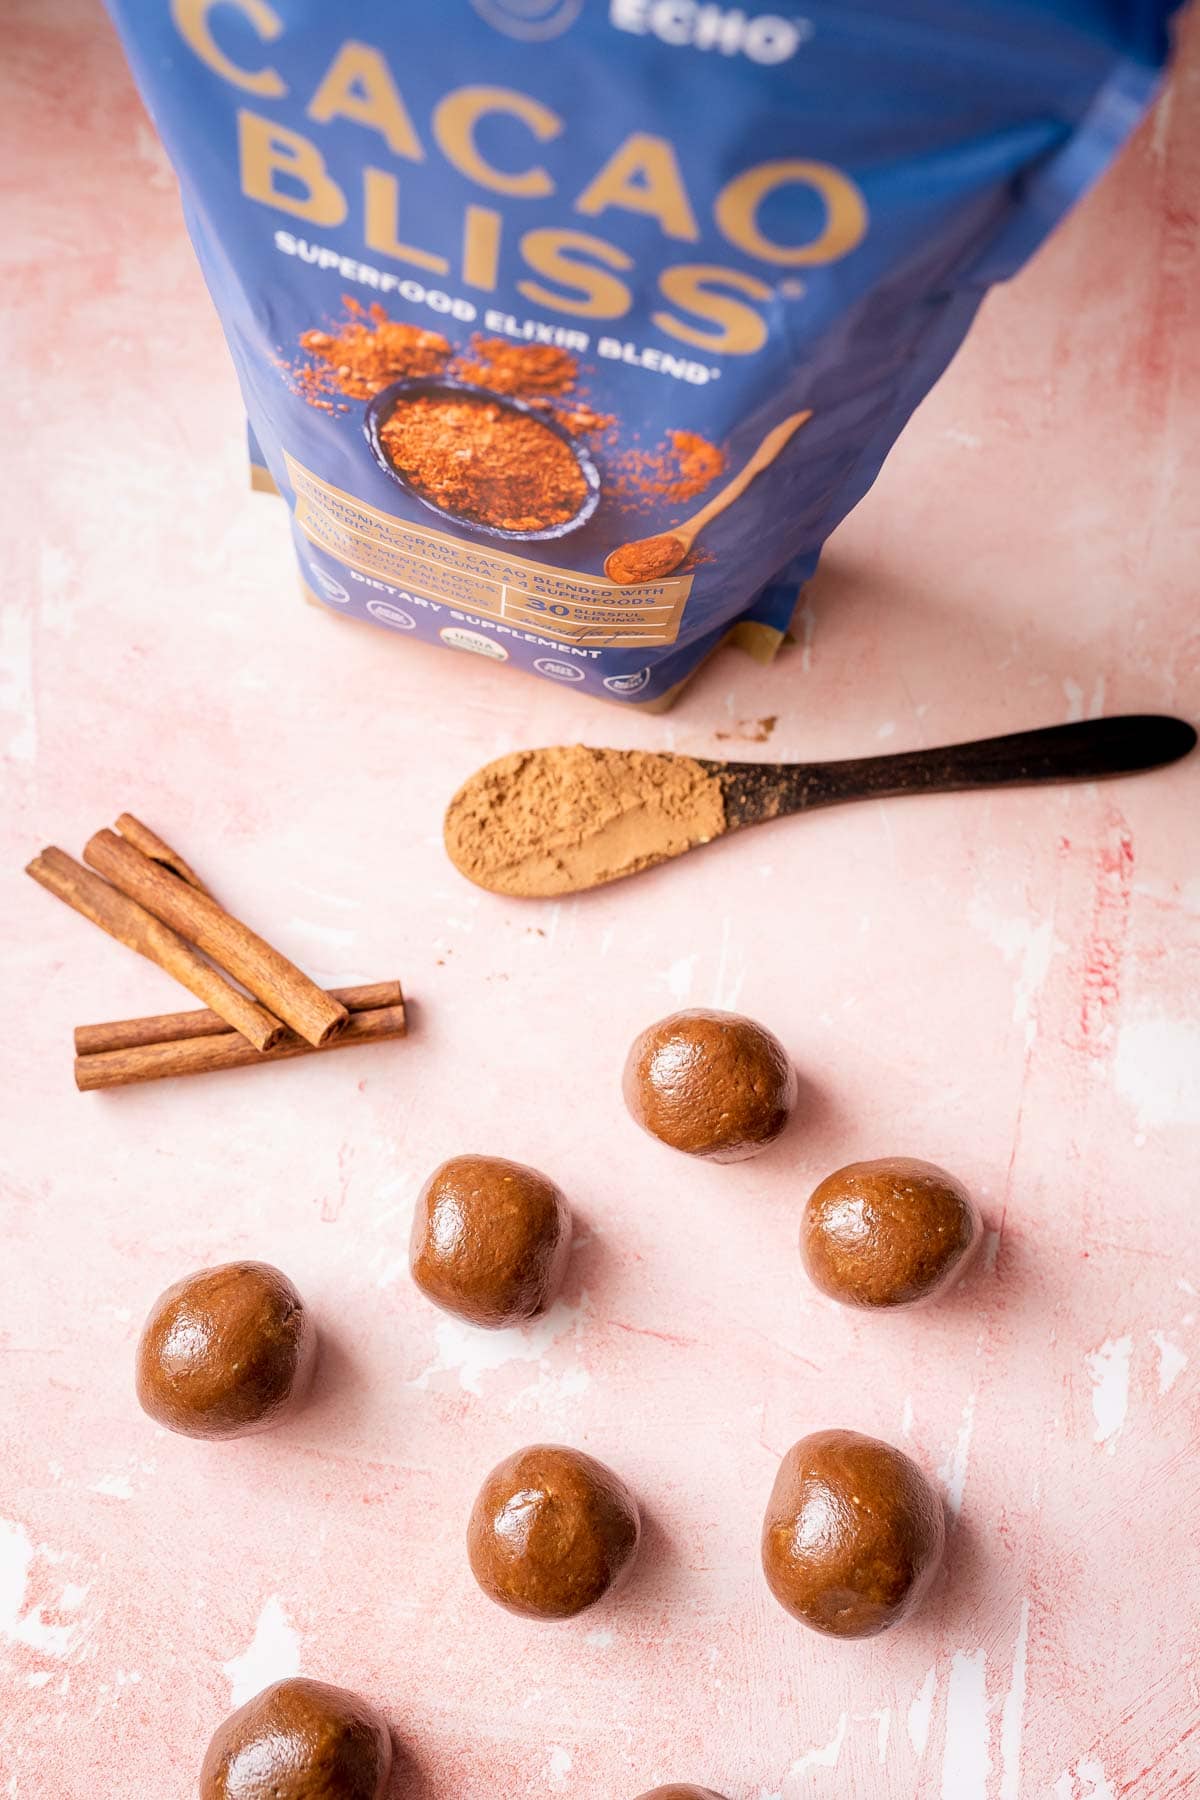 A blue bag of Earth Echo Cacao Bliss rests next to brown bliss balls, cinnamon sticks and a wooden spoon.